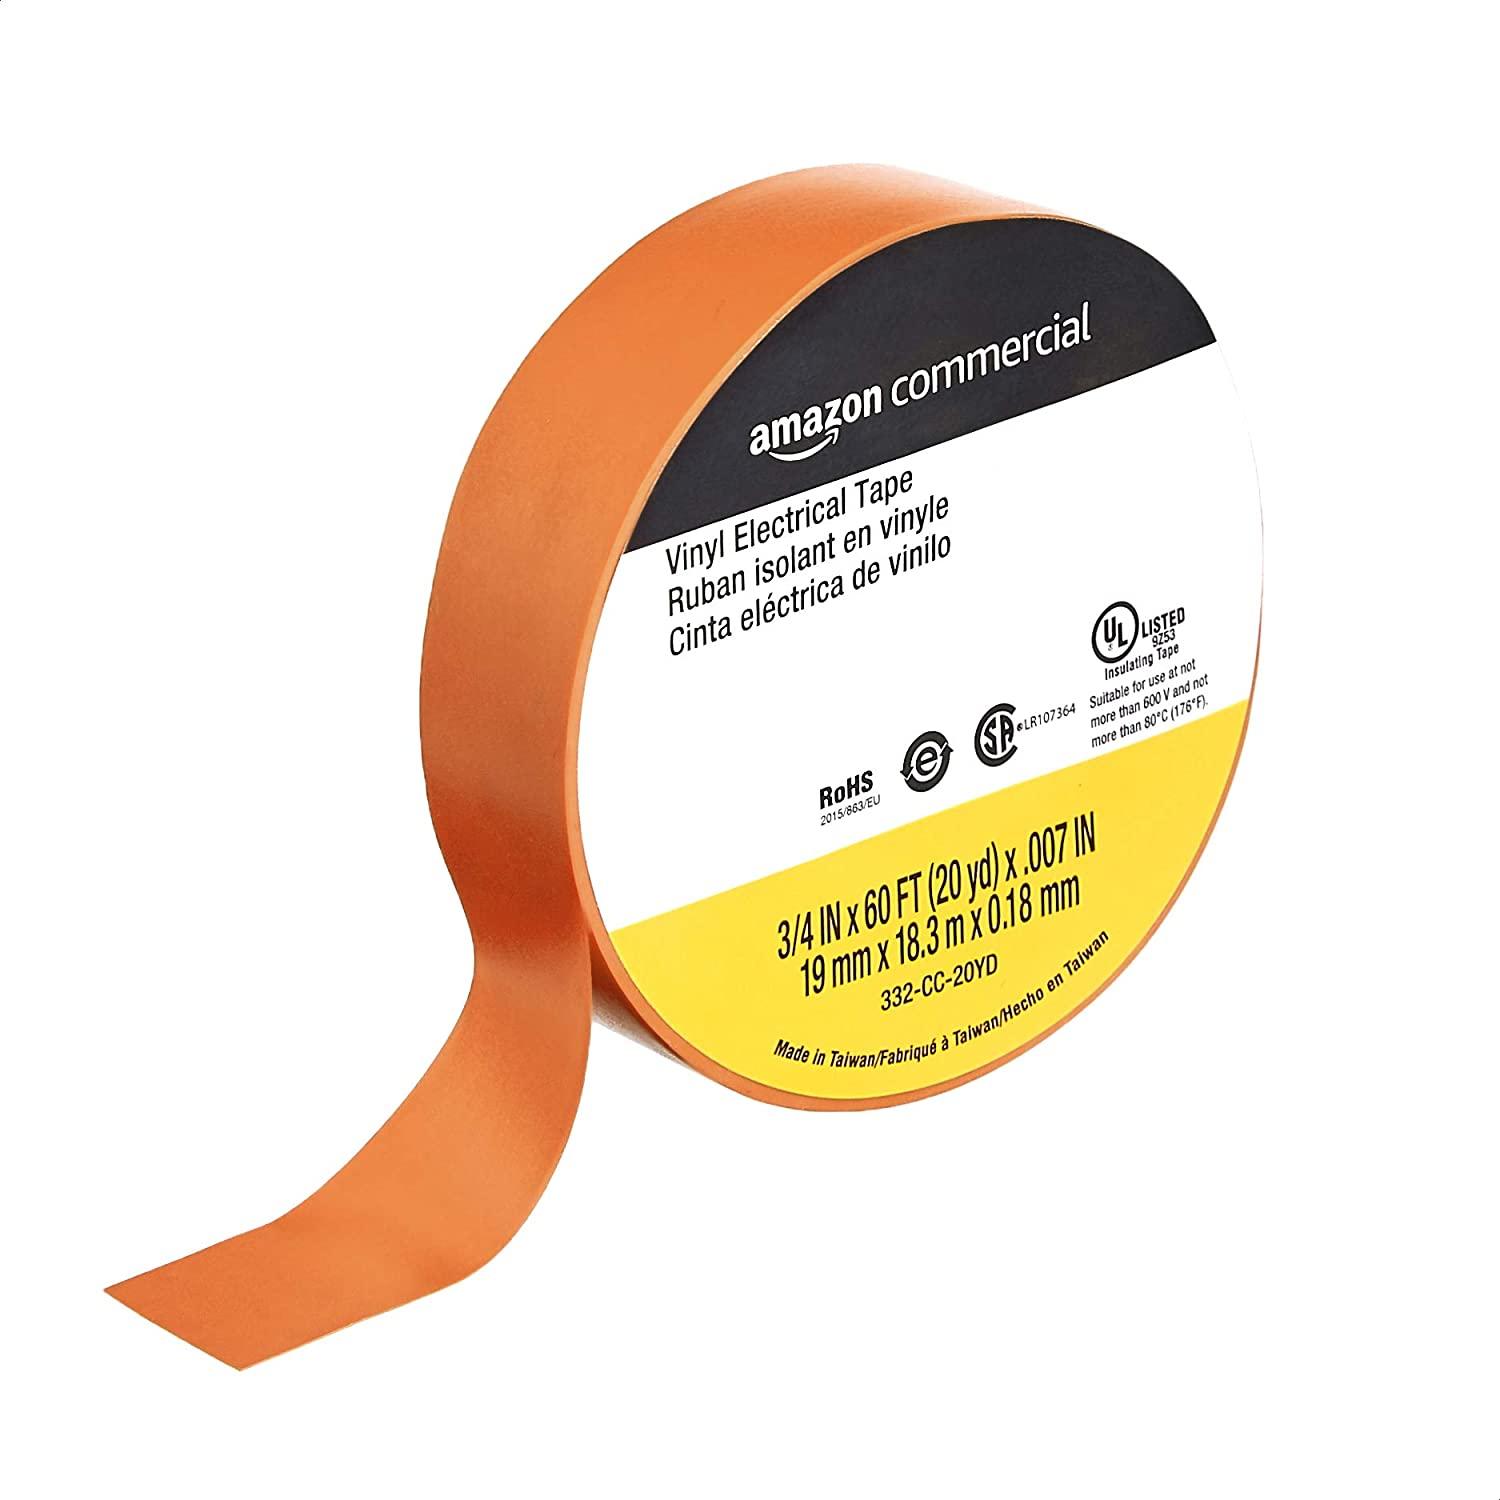 AmazonCommercial Vinyl Electrical Tape 12 Pack for $4.17